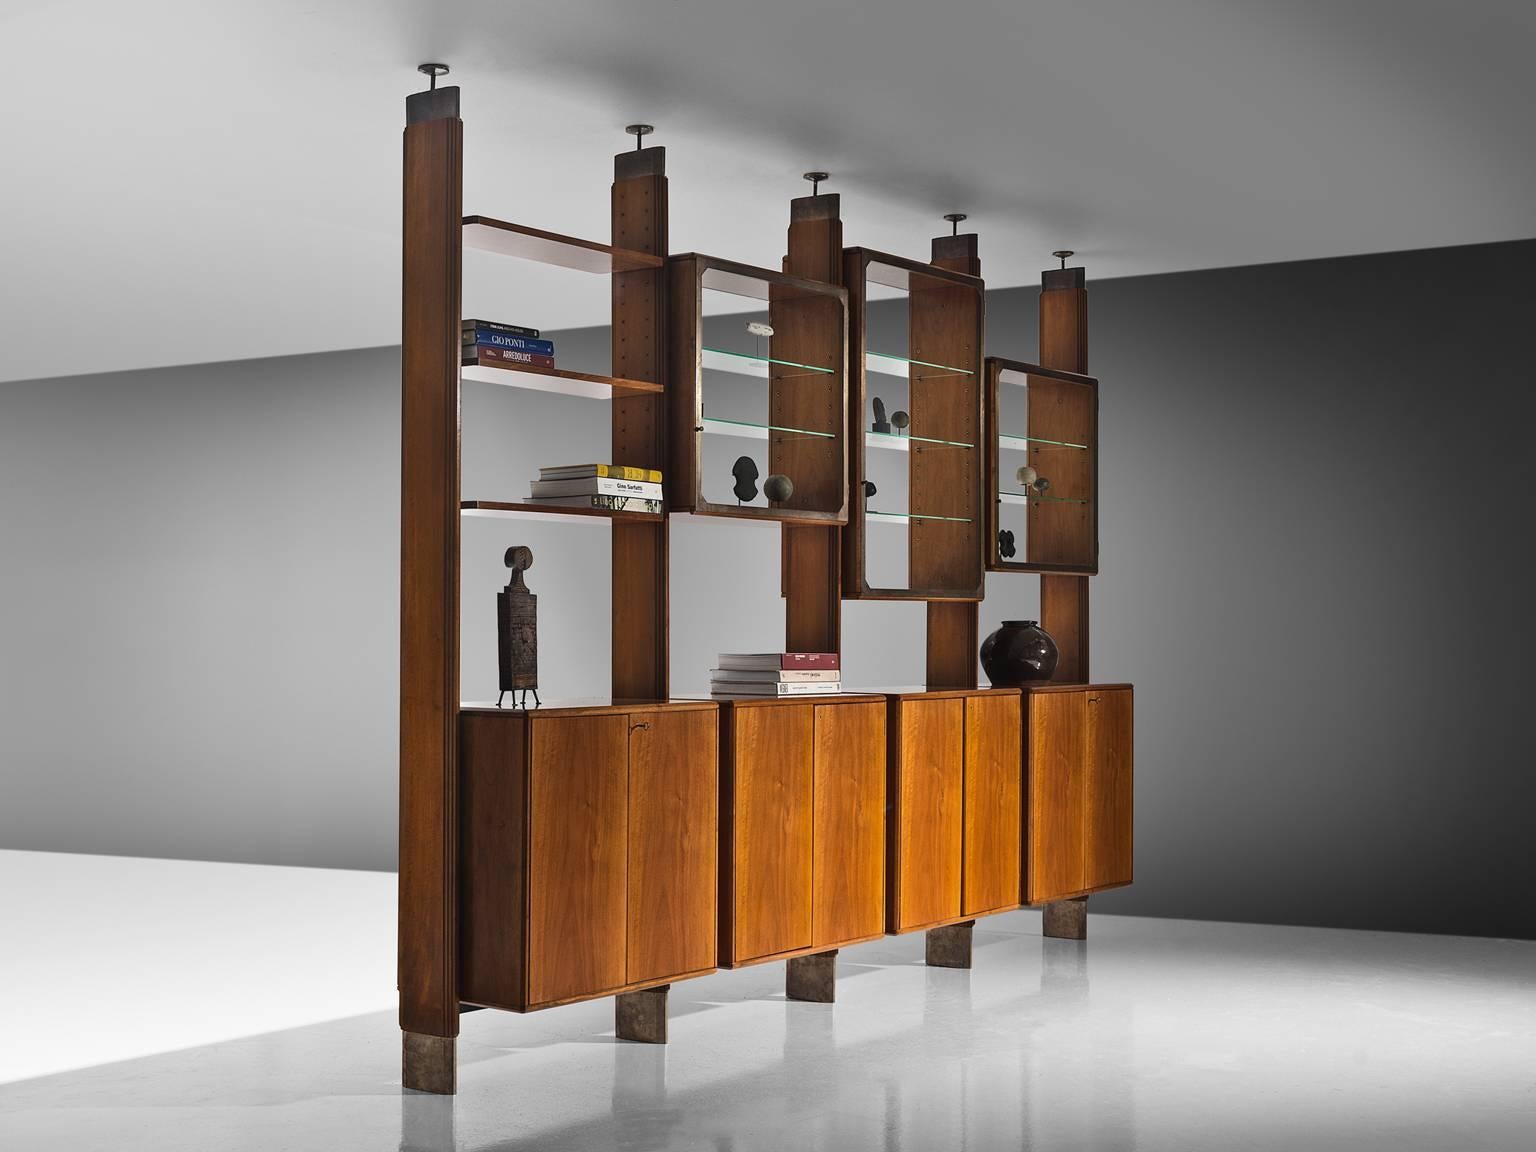 Studio BBPR for Pierino Frigerio, wall unit, Italian walnut, Italy, circa 1952.

This cabinet is designed by Studio BBPR and executed by Pierino Frigerio. It is a truly marvellous piece by the architectural collective. The library wall is made for